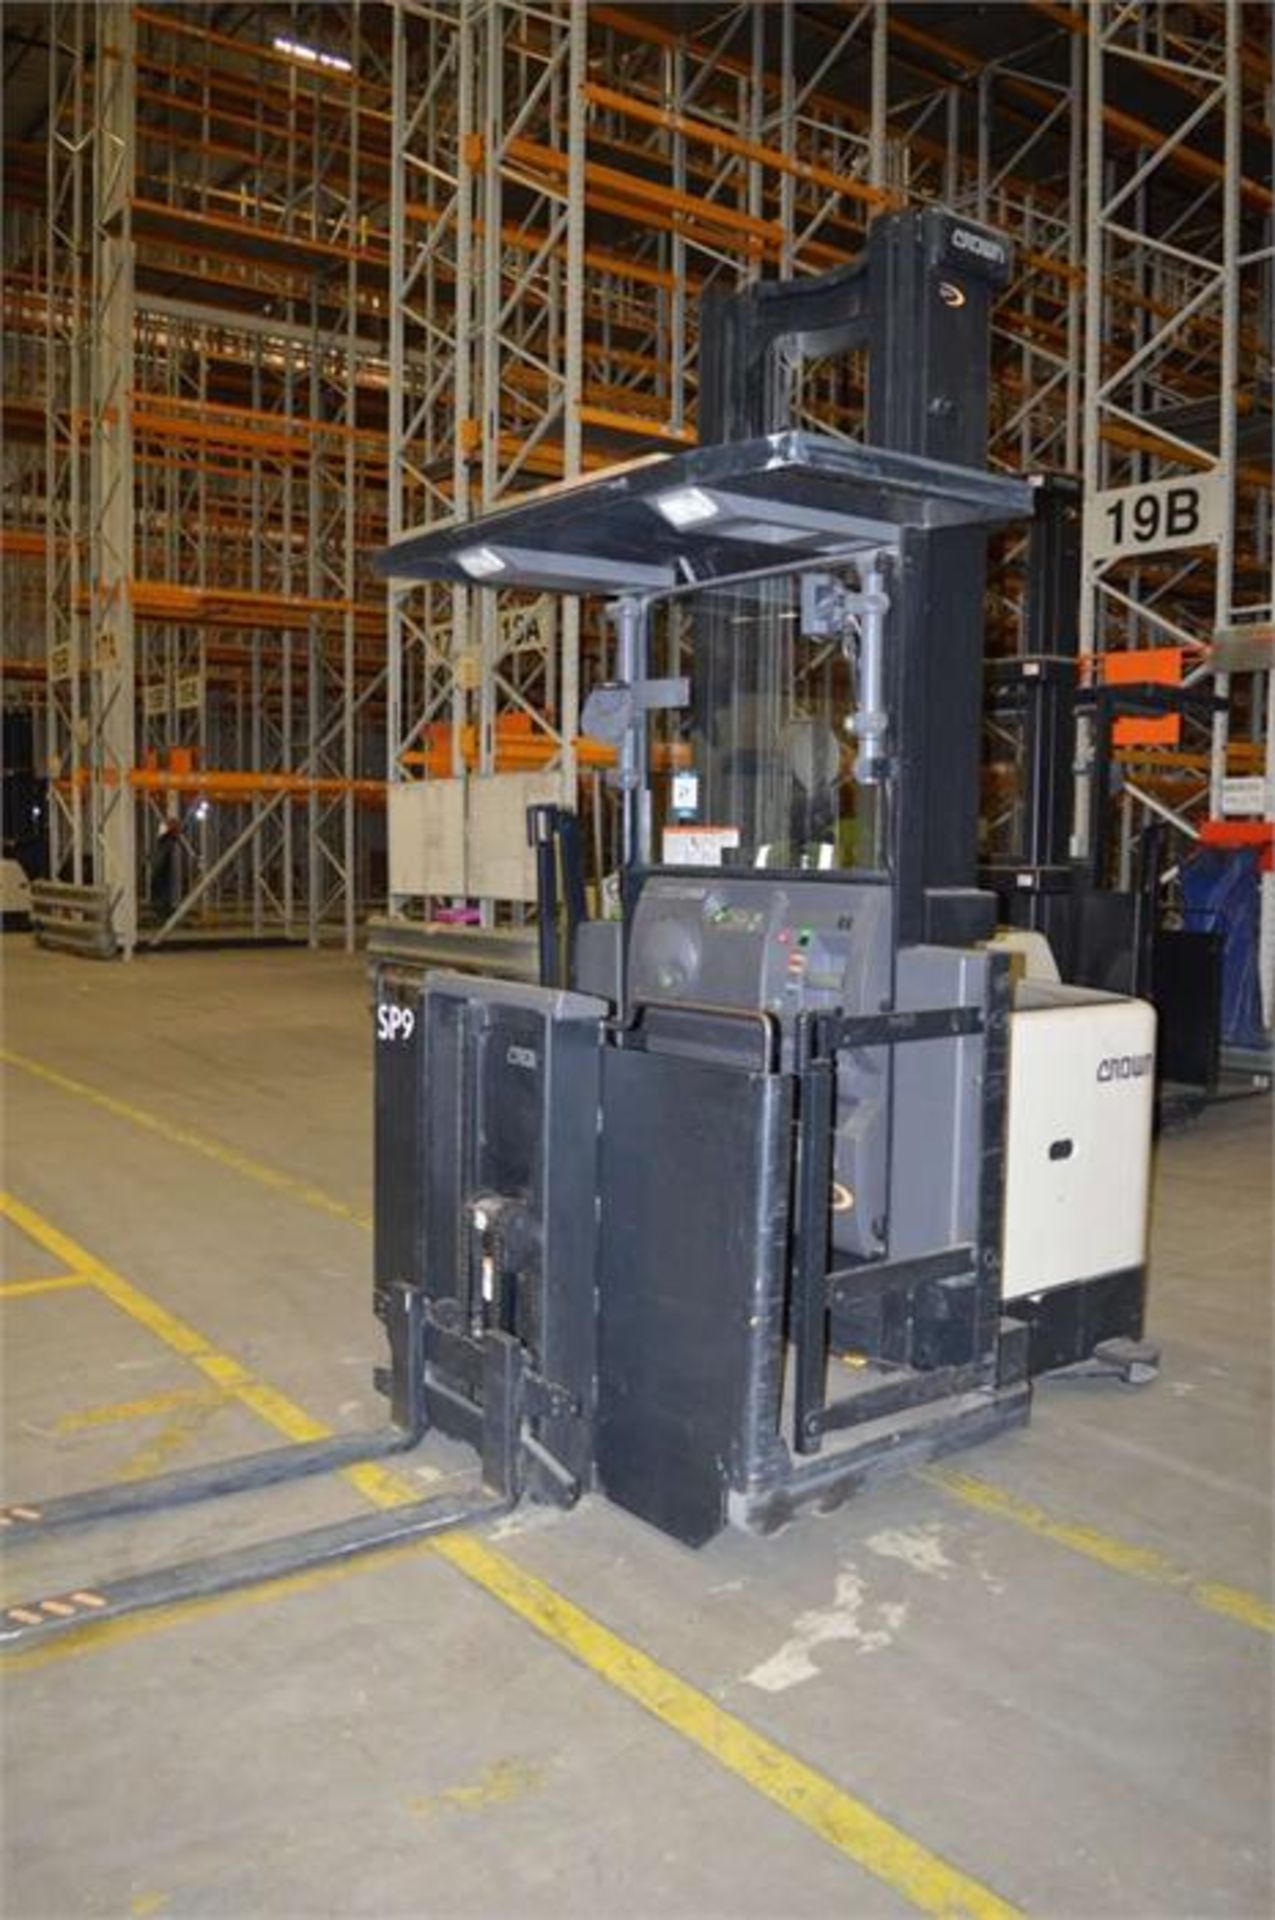 Crown, SP3500 Series, Model: SP3522-1.0, 1000kg electric high level order picker, Serial No. - Image 3 of 5